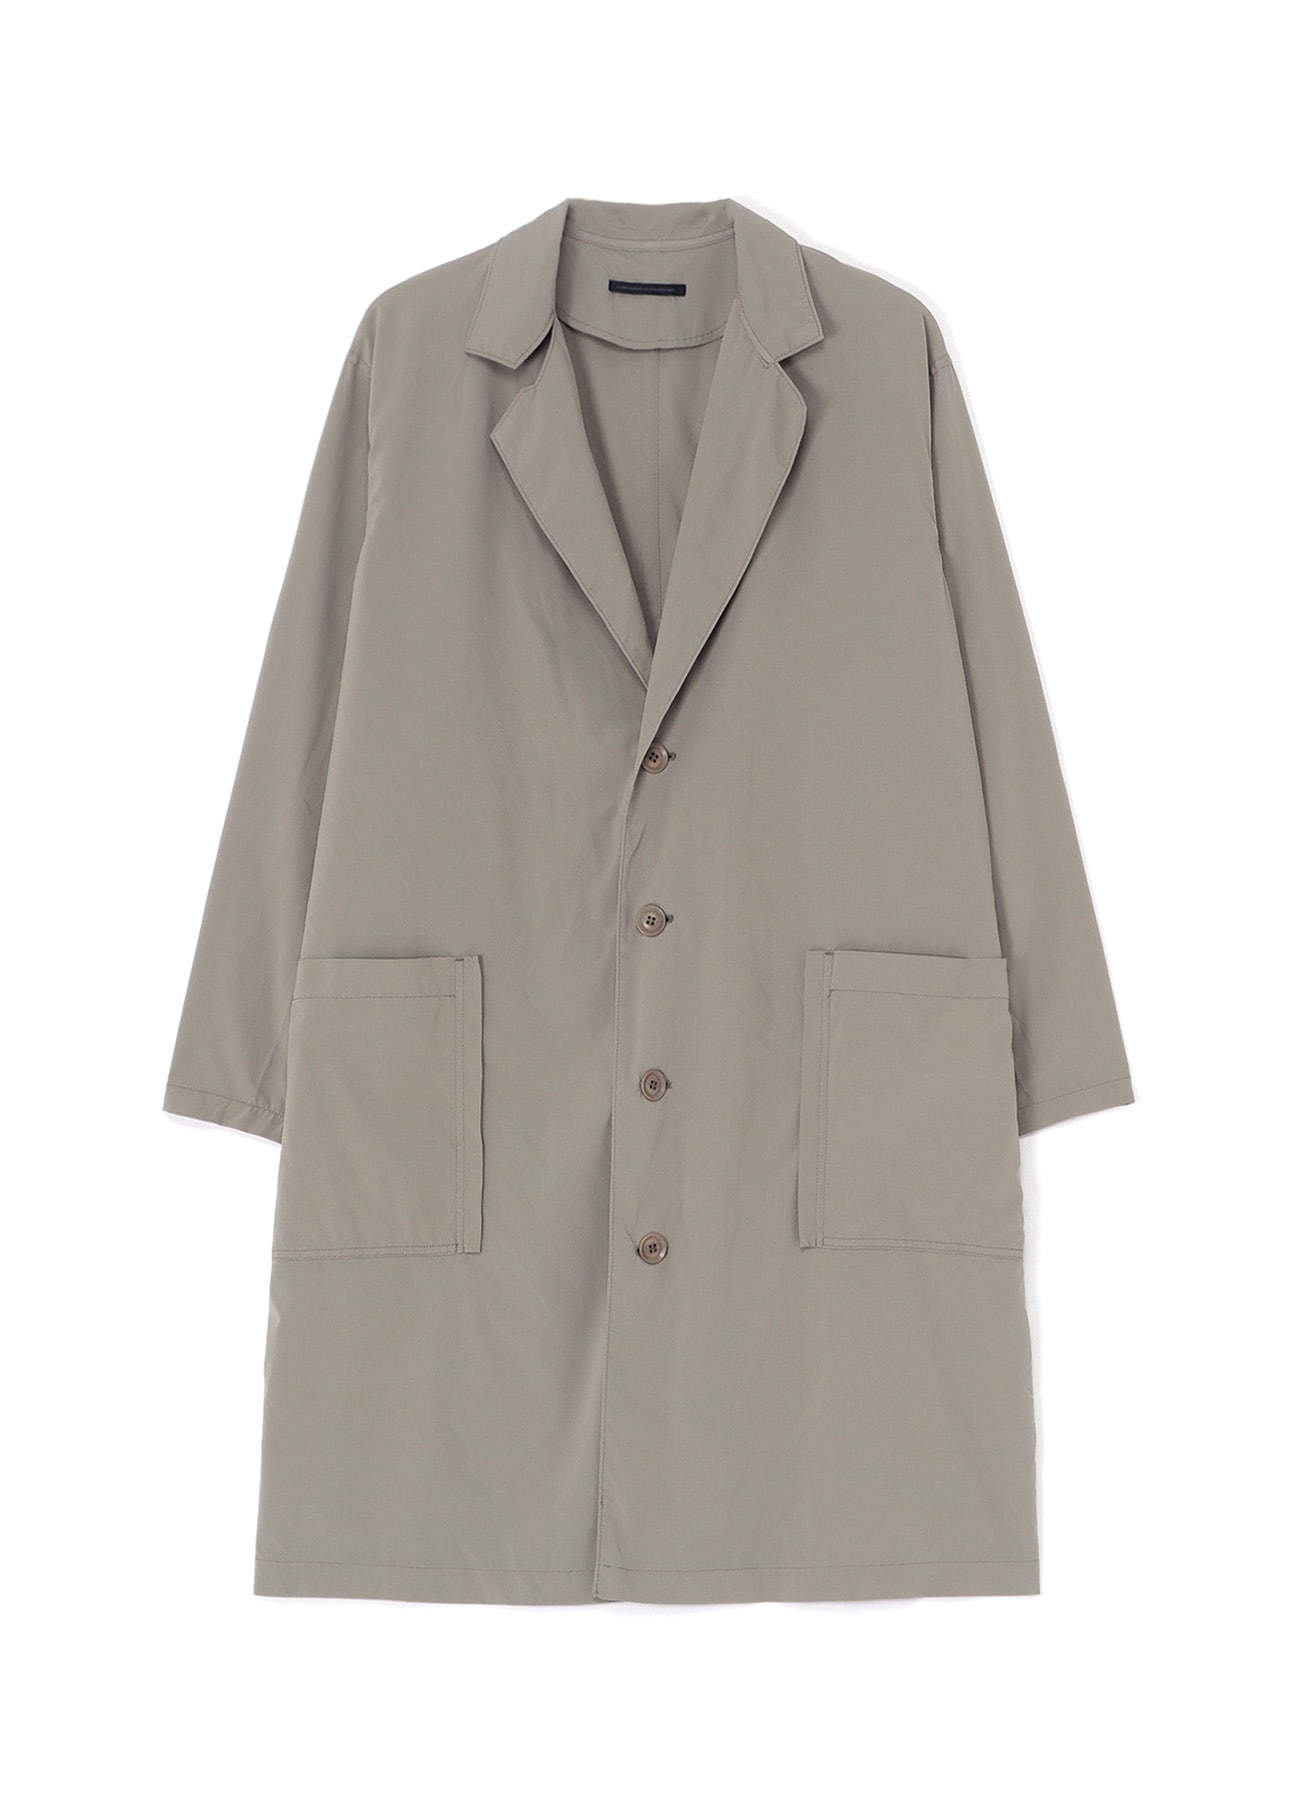 PRODUCT DYED CUPRO JACKET WITH LEFT NOTCHED LAPEL(XS Beige): Y's 